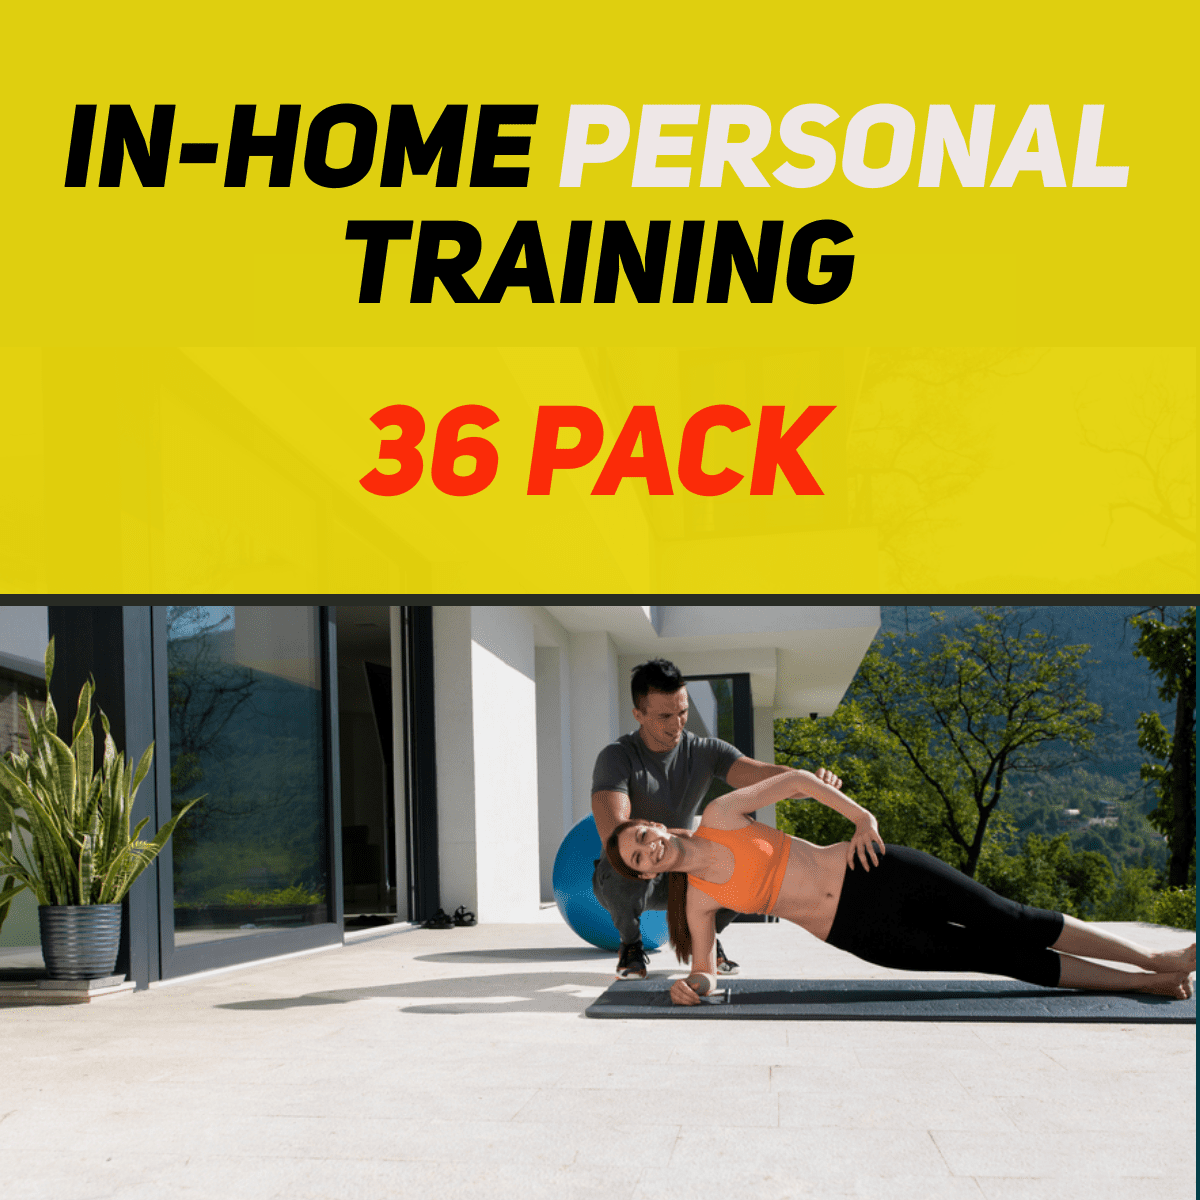 In-Home Personal Training 36 Pack